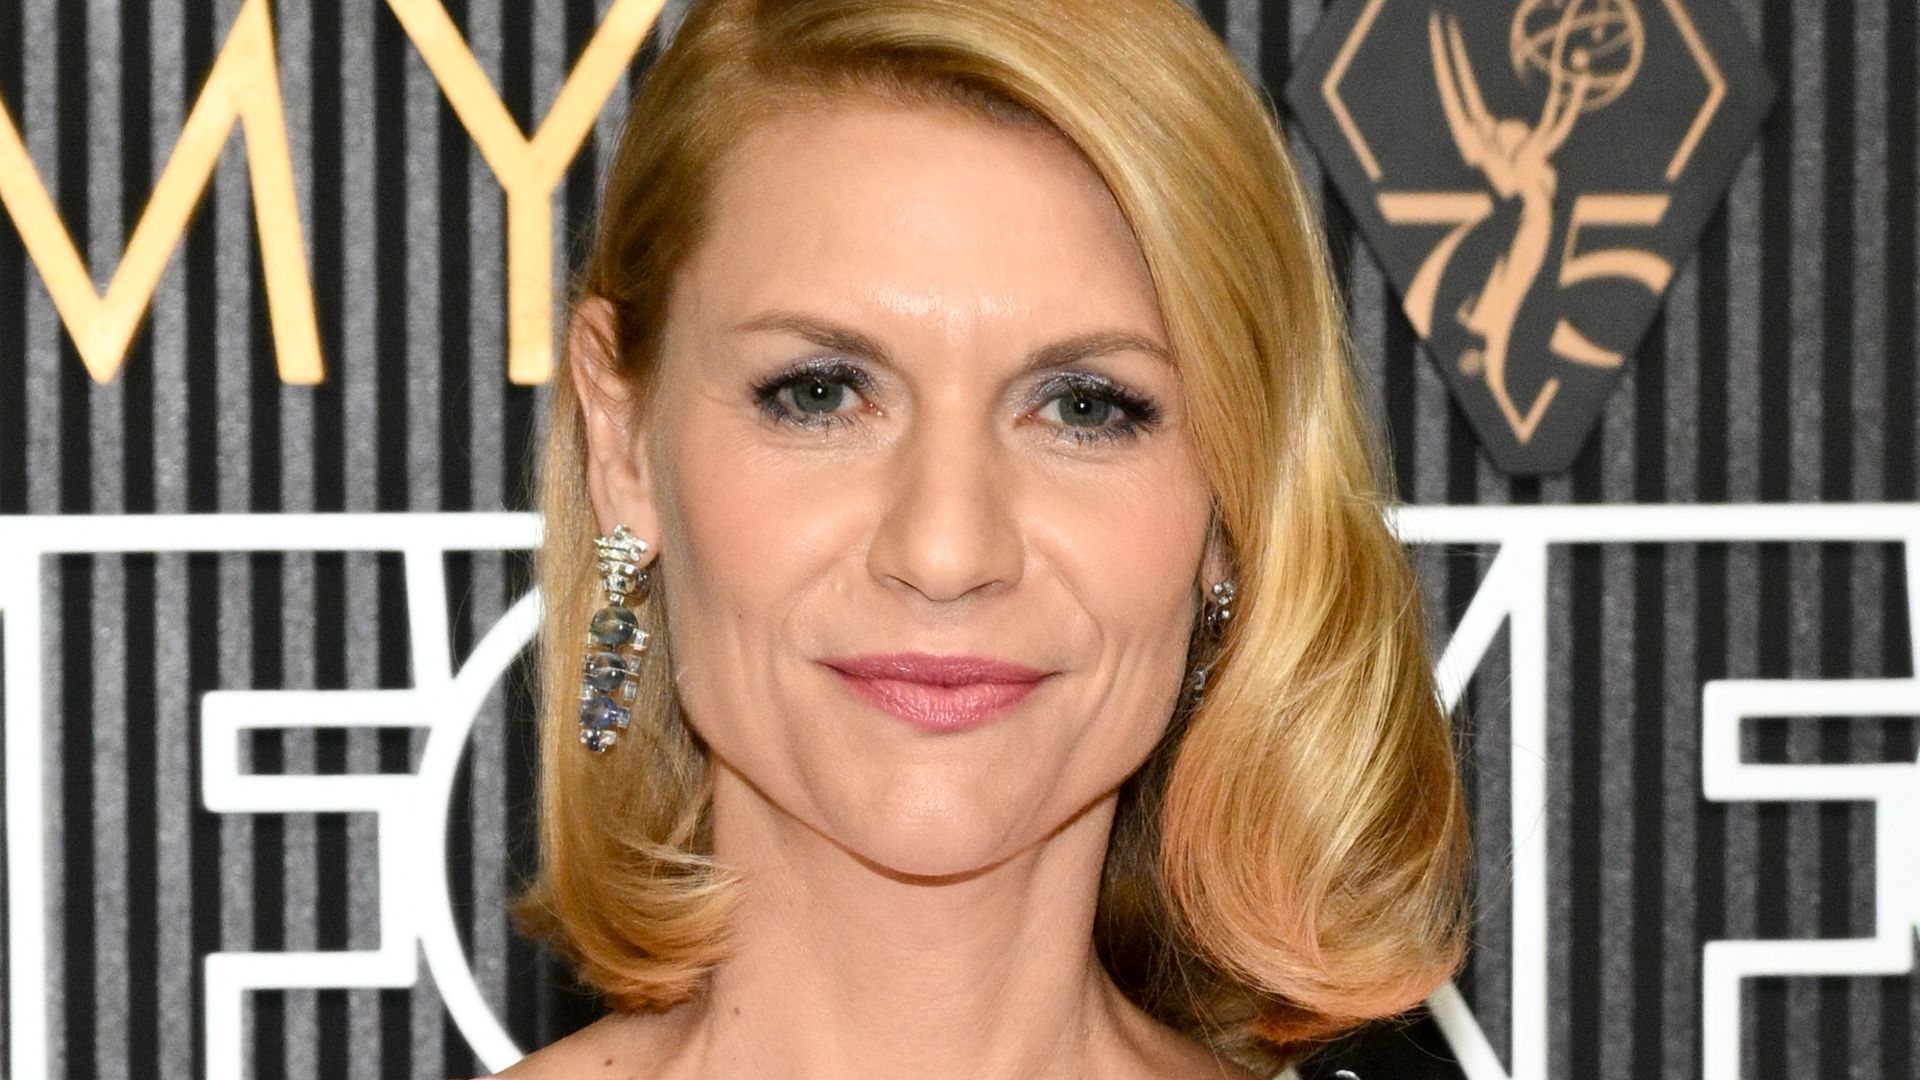 Claire Danes at the Emmys